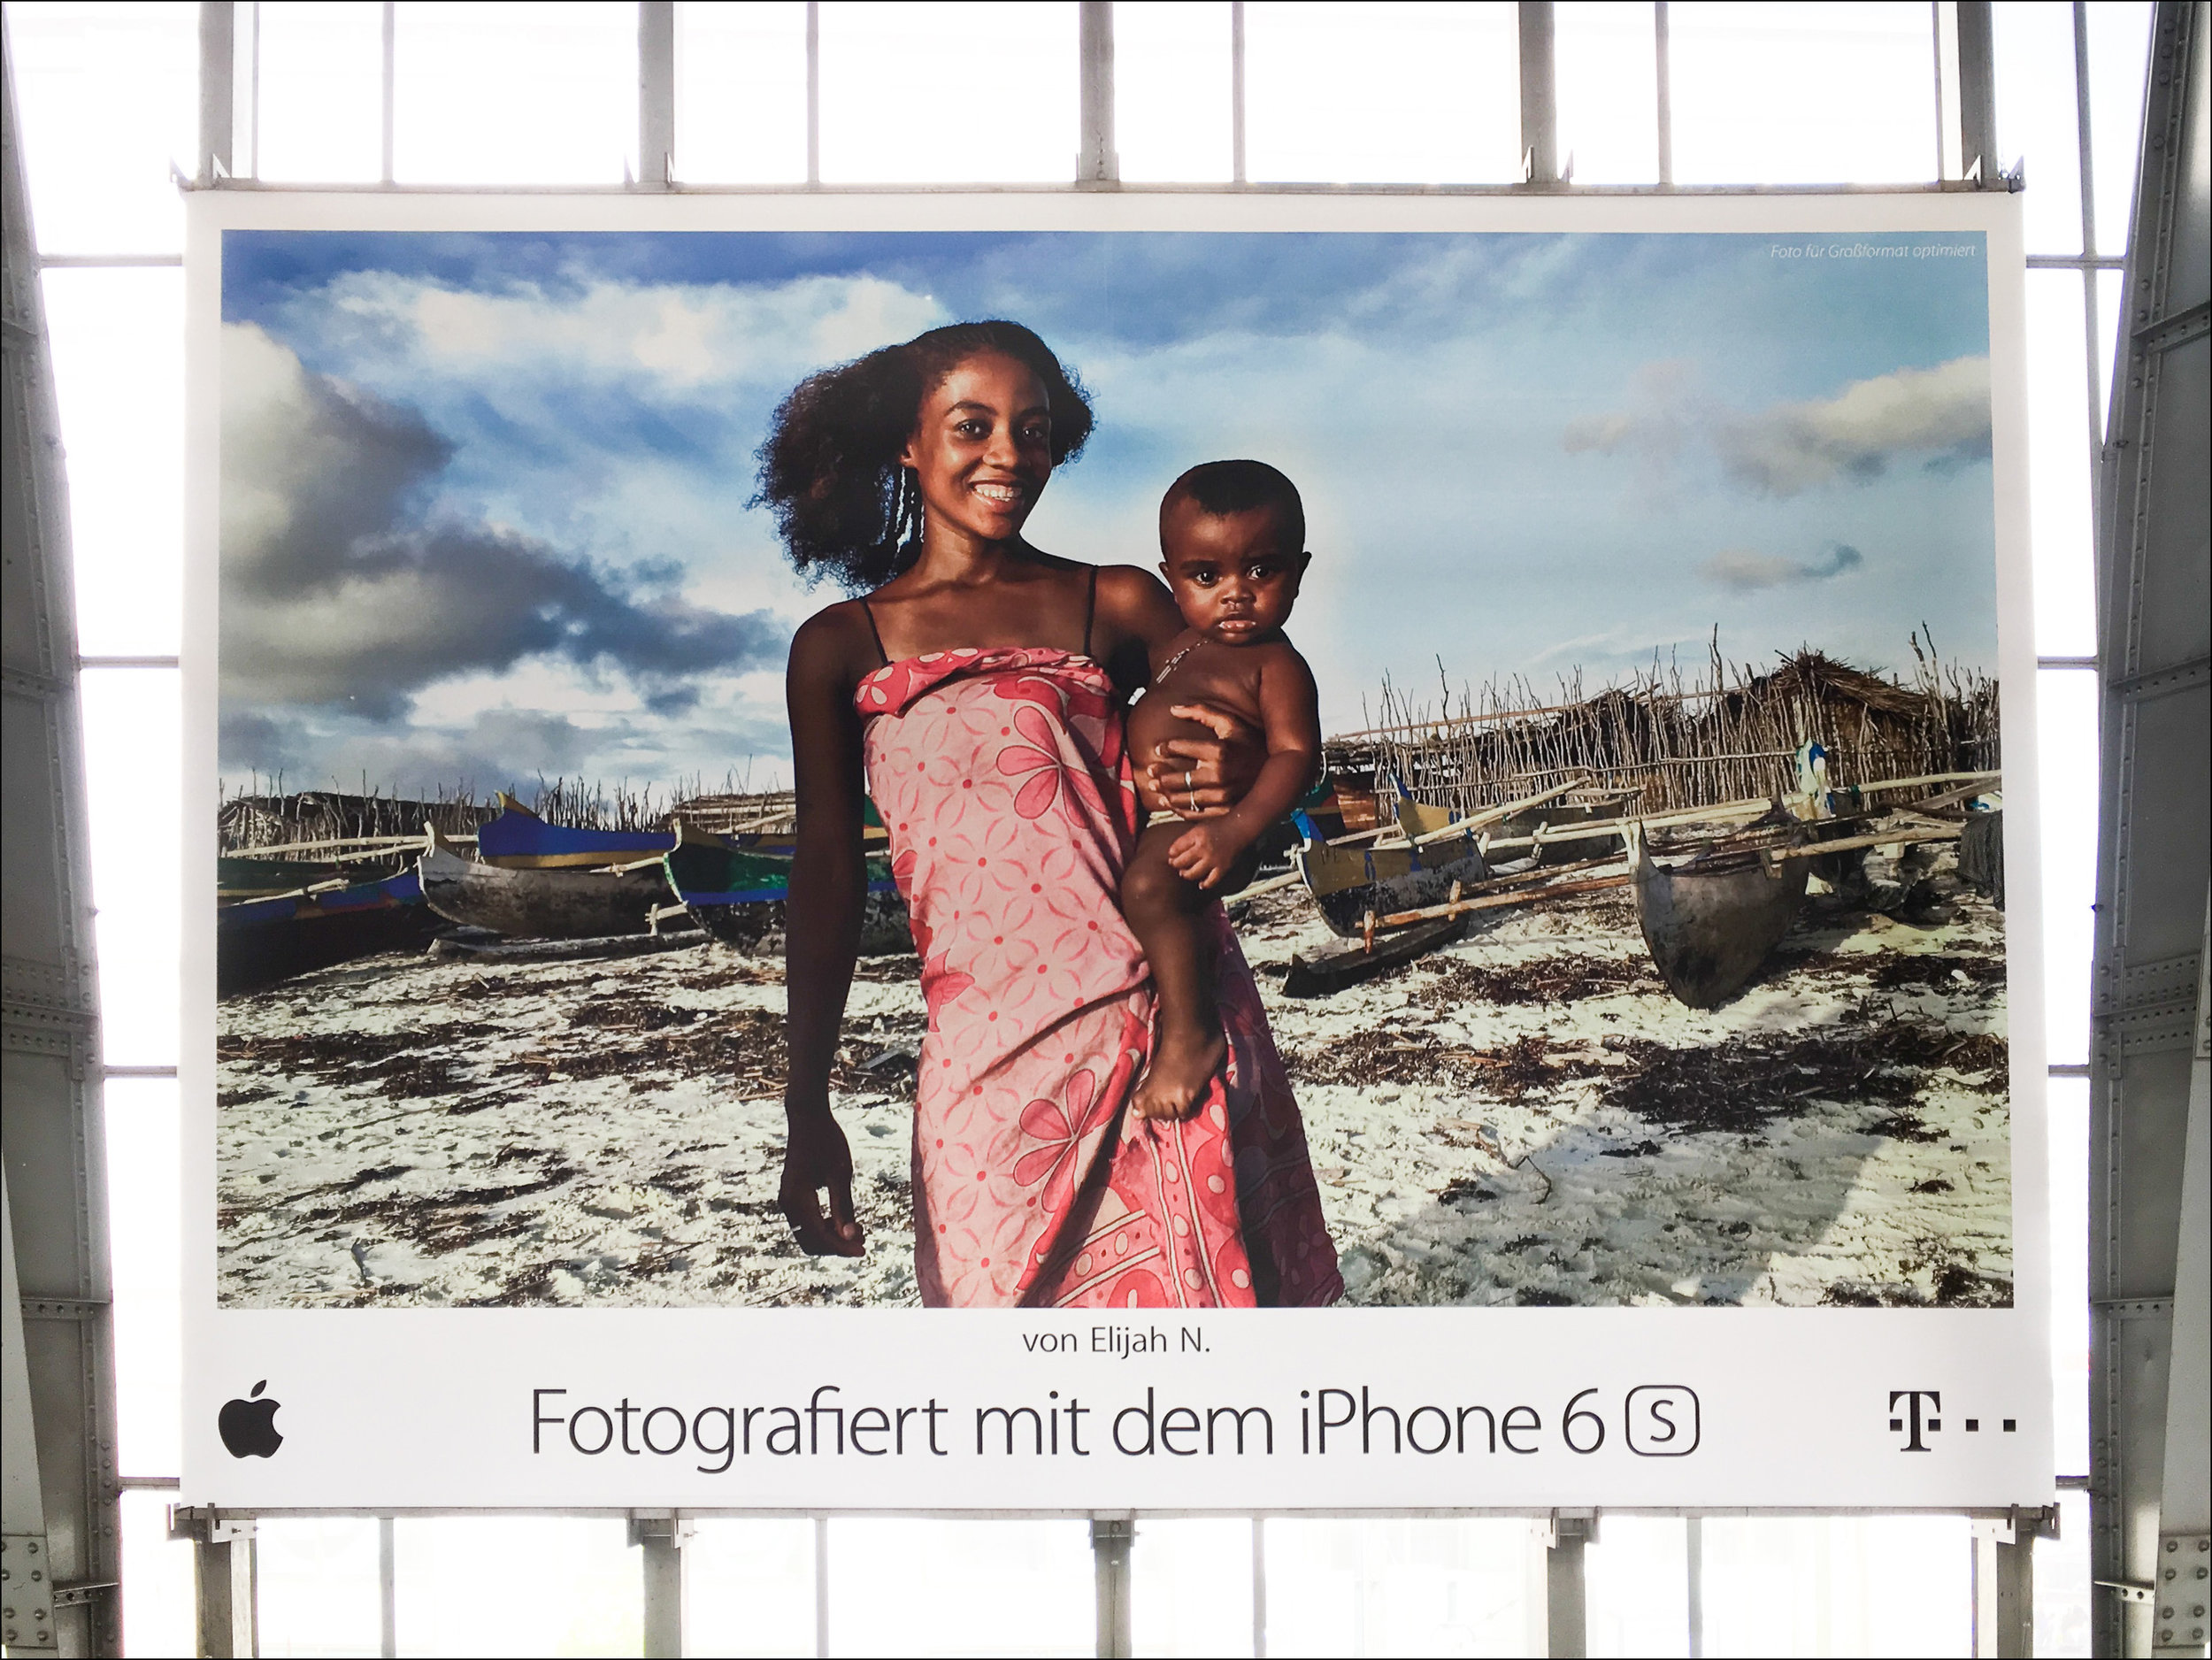  Apple 'Shot on iPhone 6s' OOH campaign, Berlin, Germany, June 2016 